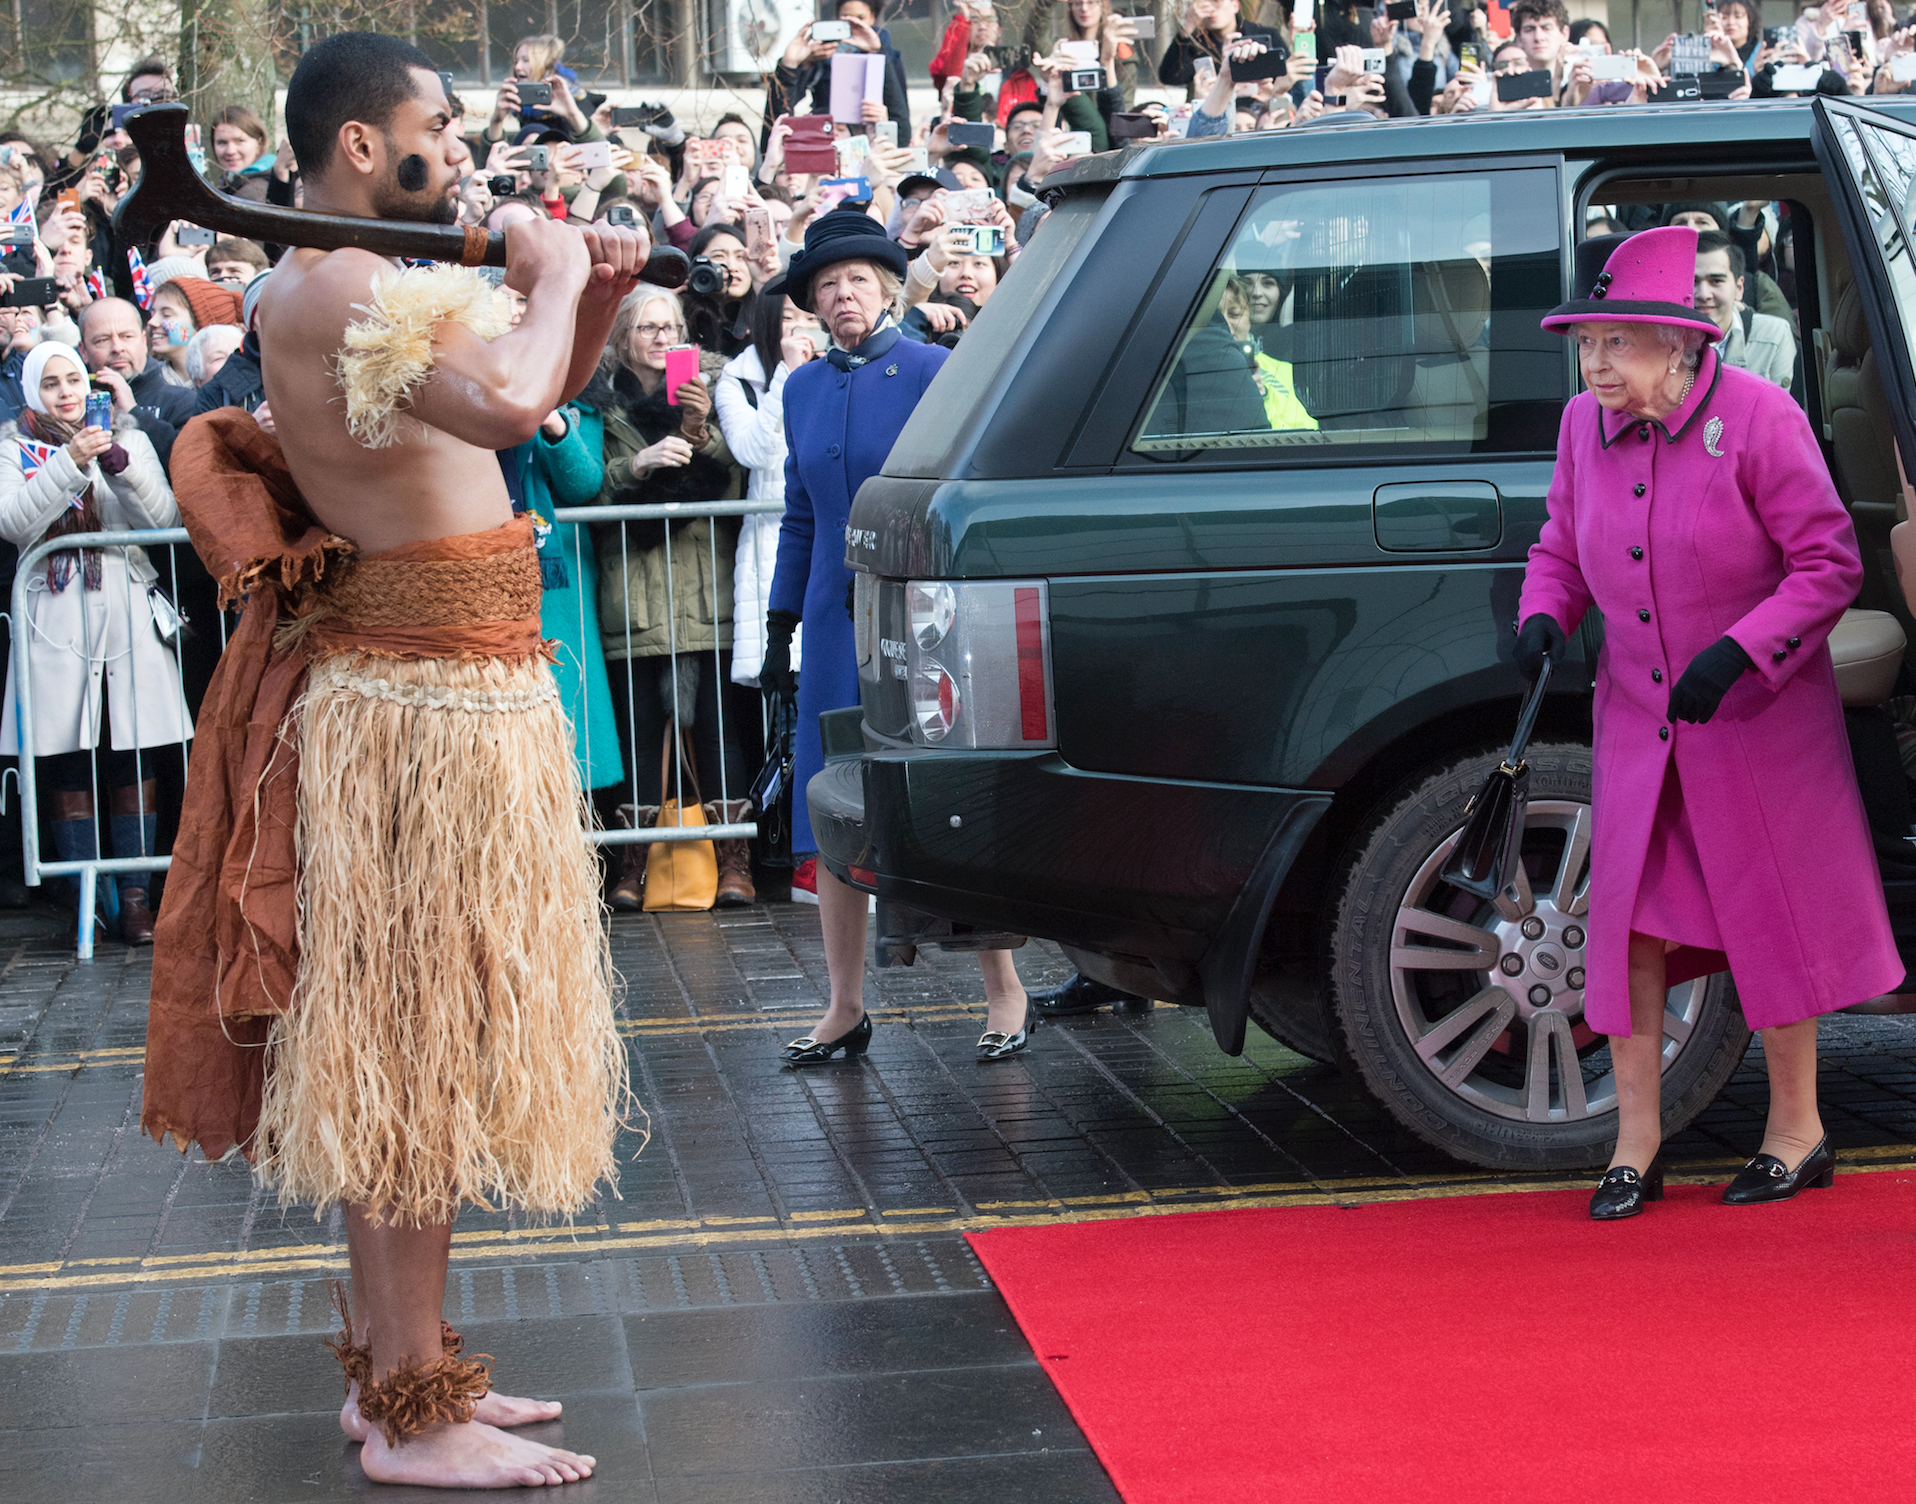 NORWICH, ENGLAND - JANUARY 27: Queen Elizabeth II arrives to visit the 'Fiji: Art & Life in the Pacific' exhibition at the Sainsbury Centre for Visual Arts at the University of East Anglia on January 27, 2017 in Norwich, England. (Photo by Arthur Edwards - WPA Pool/Getty Images)